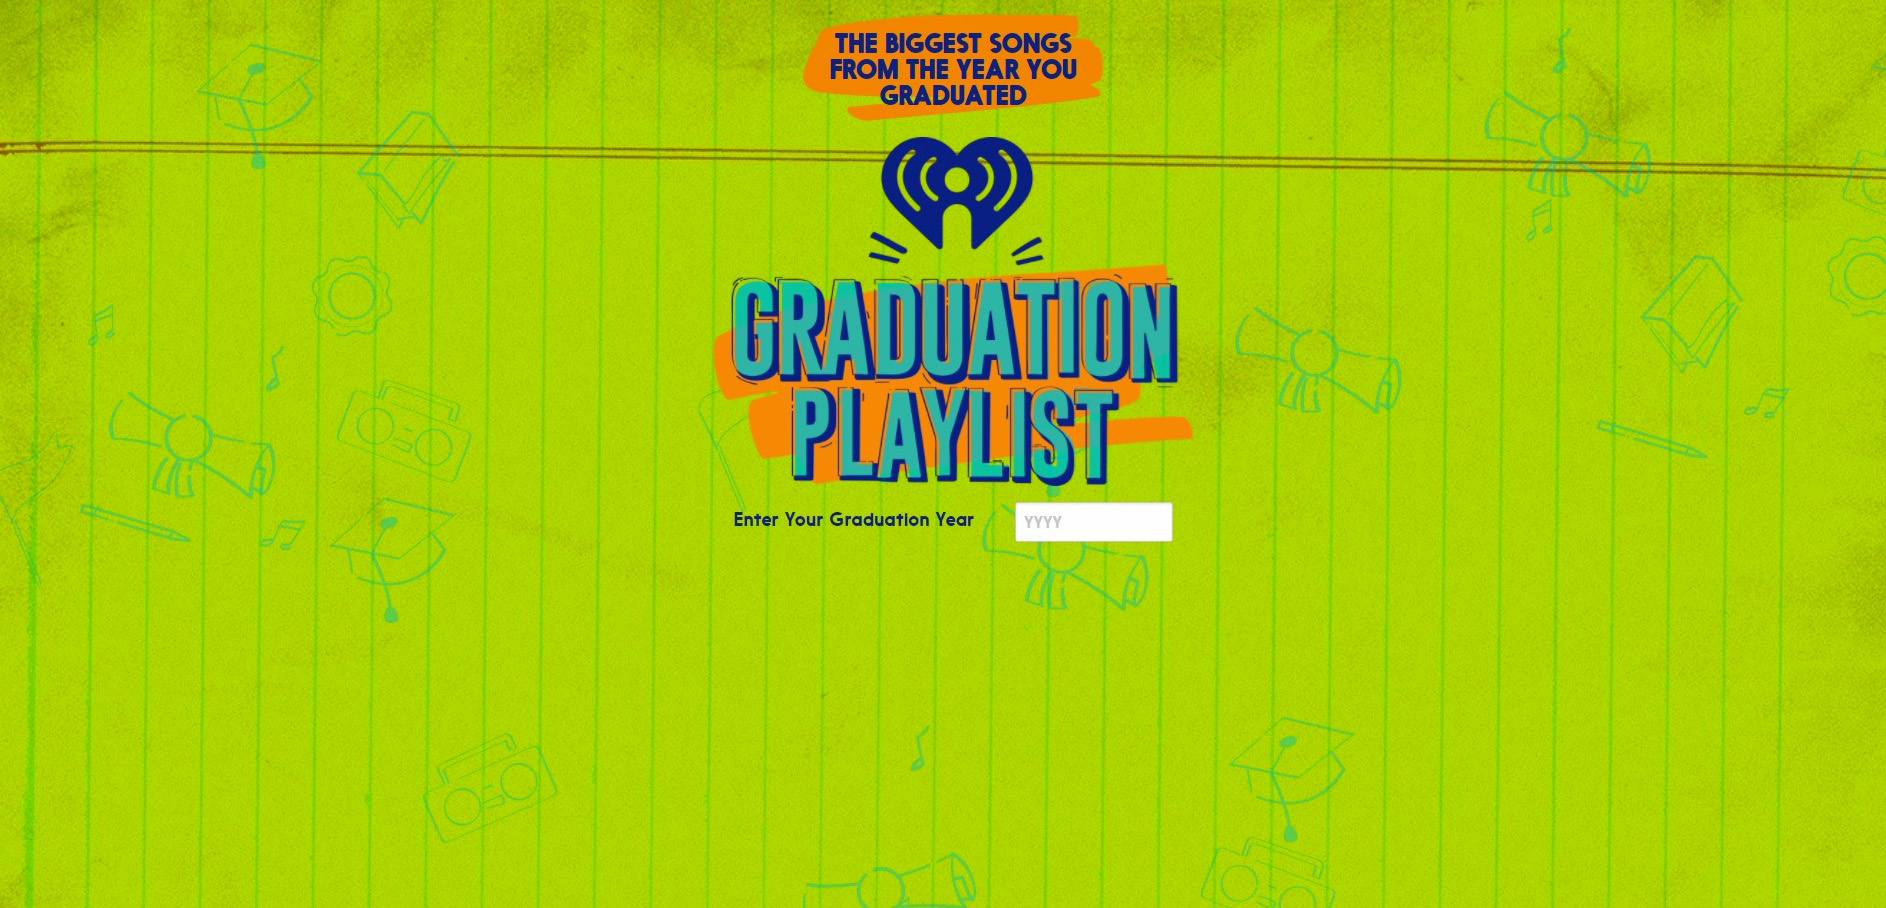 PHOTO: iHeartRadio just launched GraduationPlaylist.com, a microsite where users can access a "Class Of" playlist for every graduation class from 1950 through 2018.